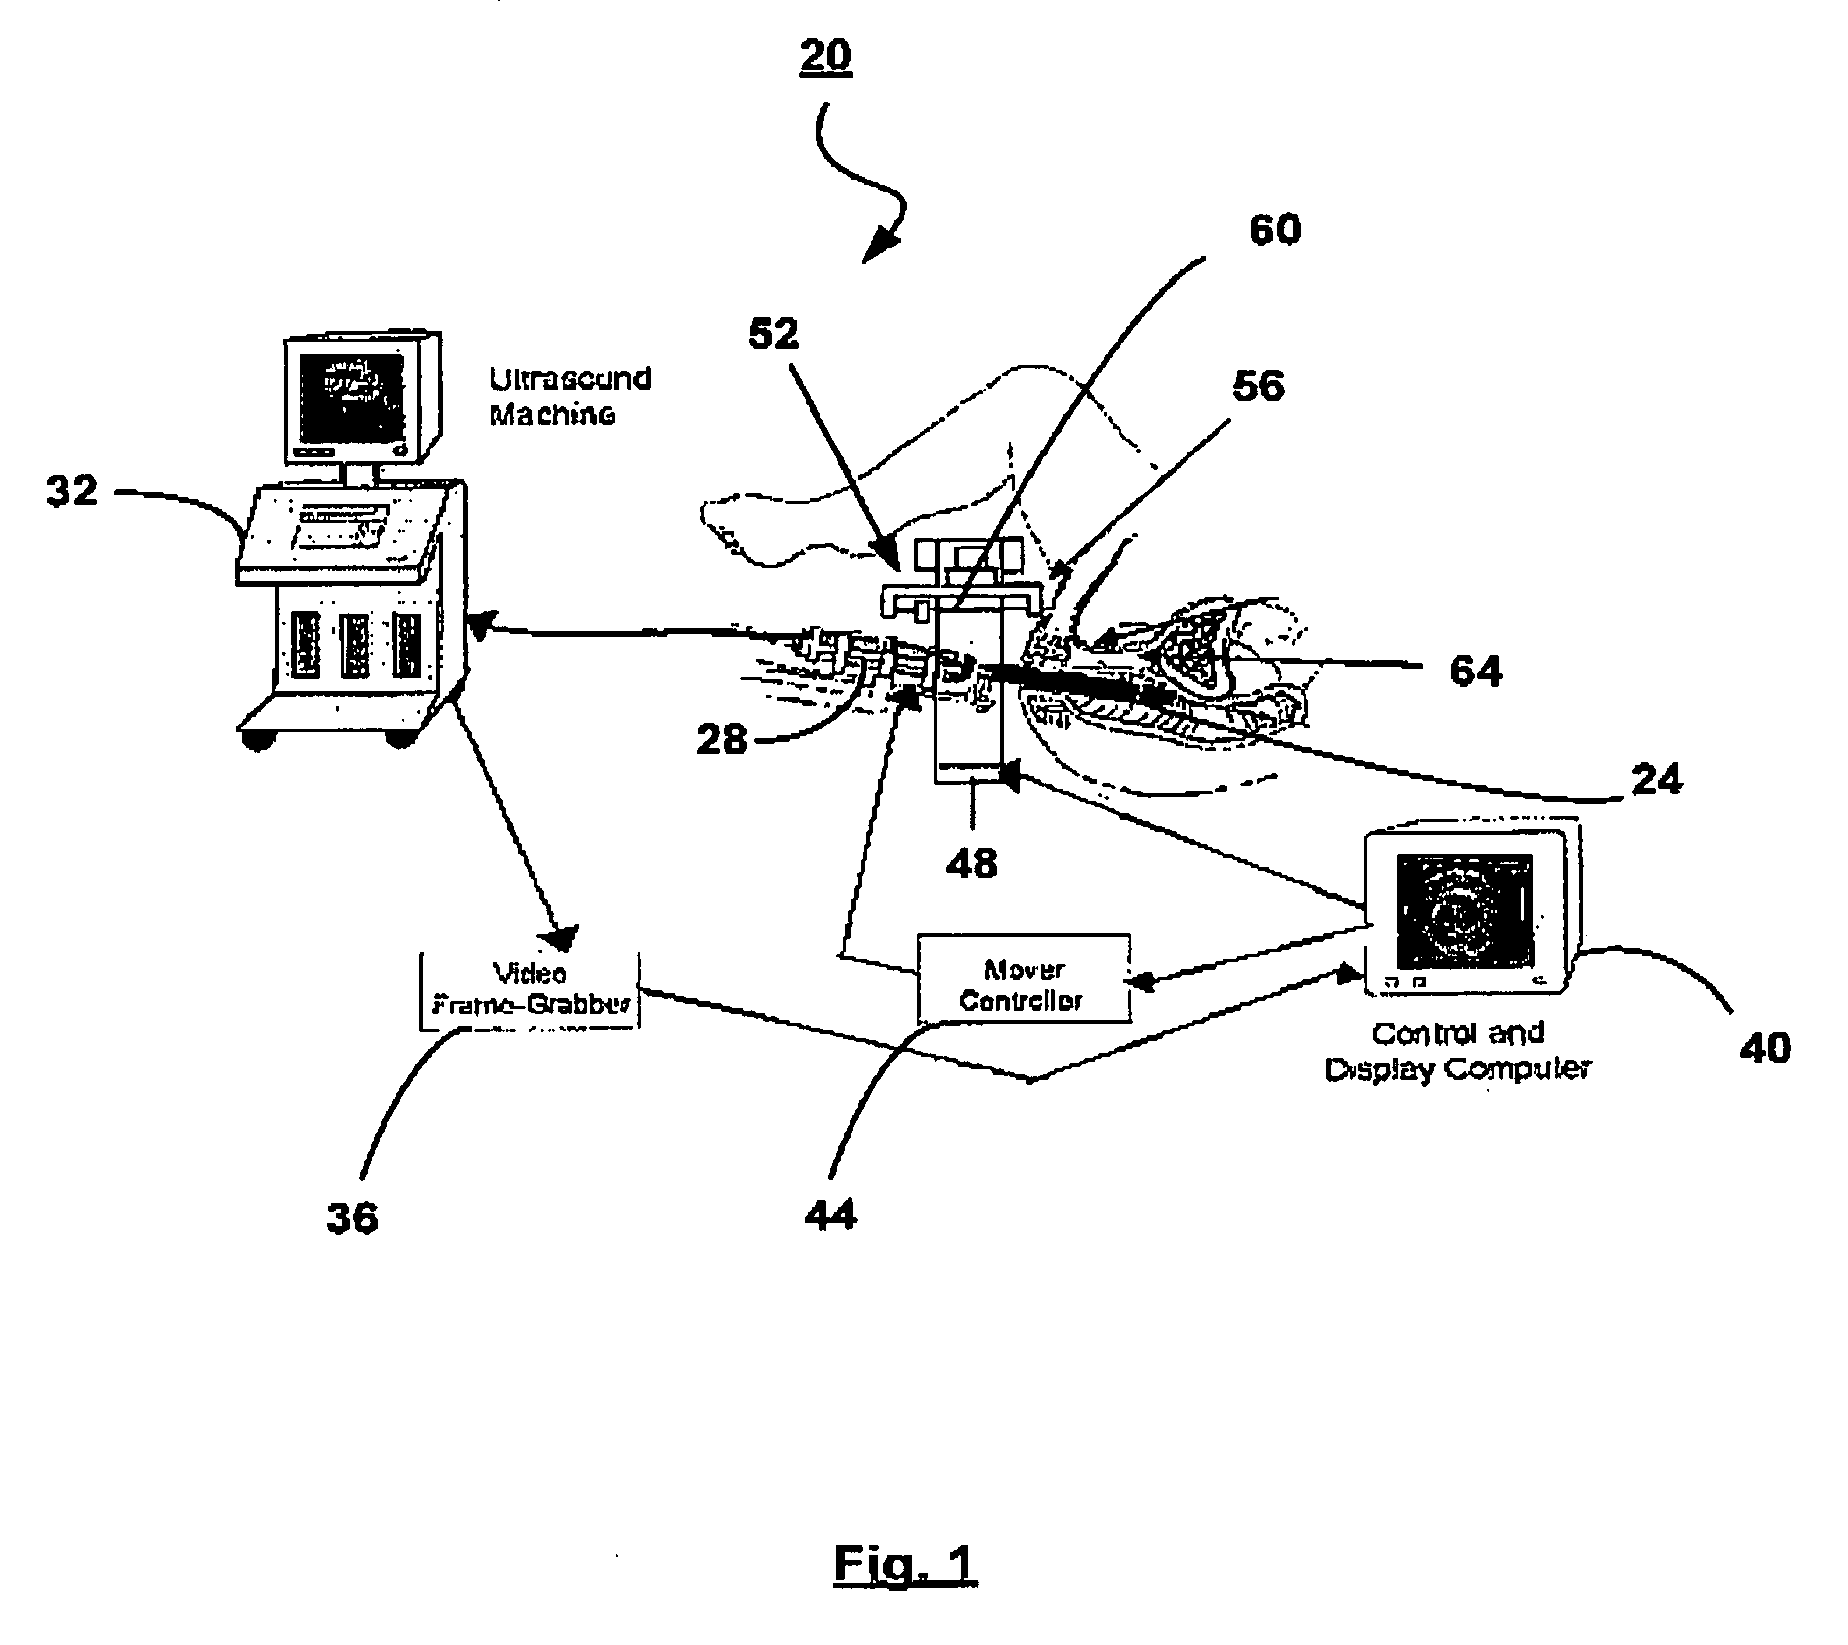 Apparatus and computing device for performing brachytherapy and methods of imaging using the same